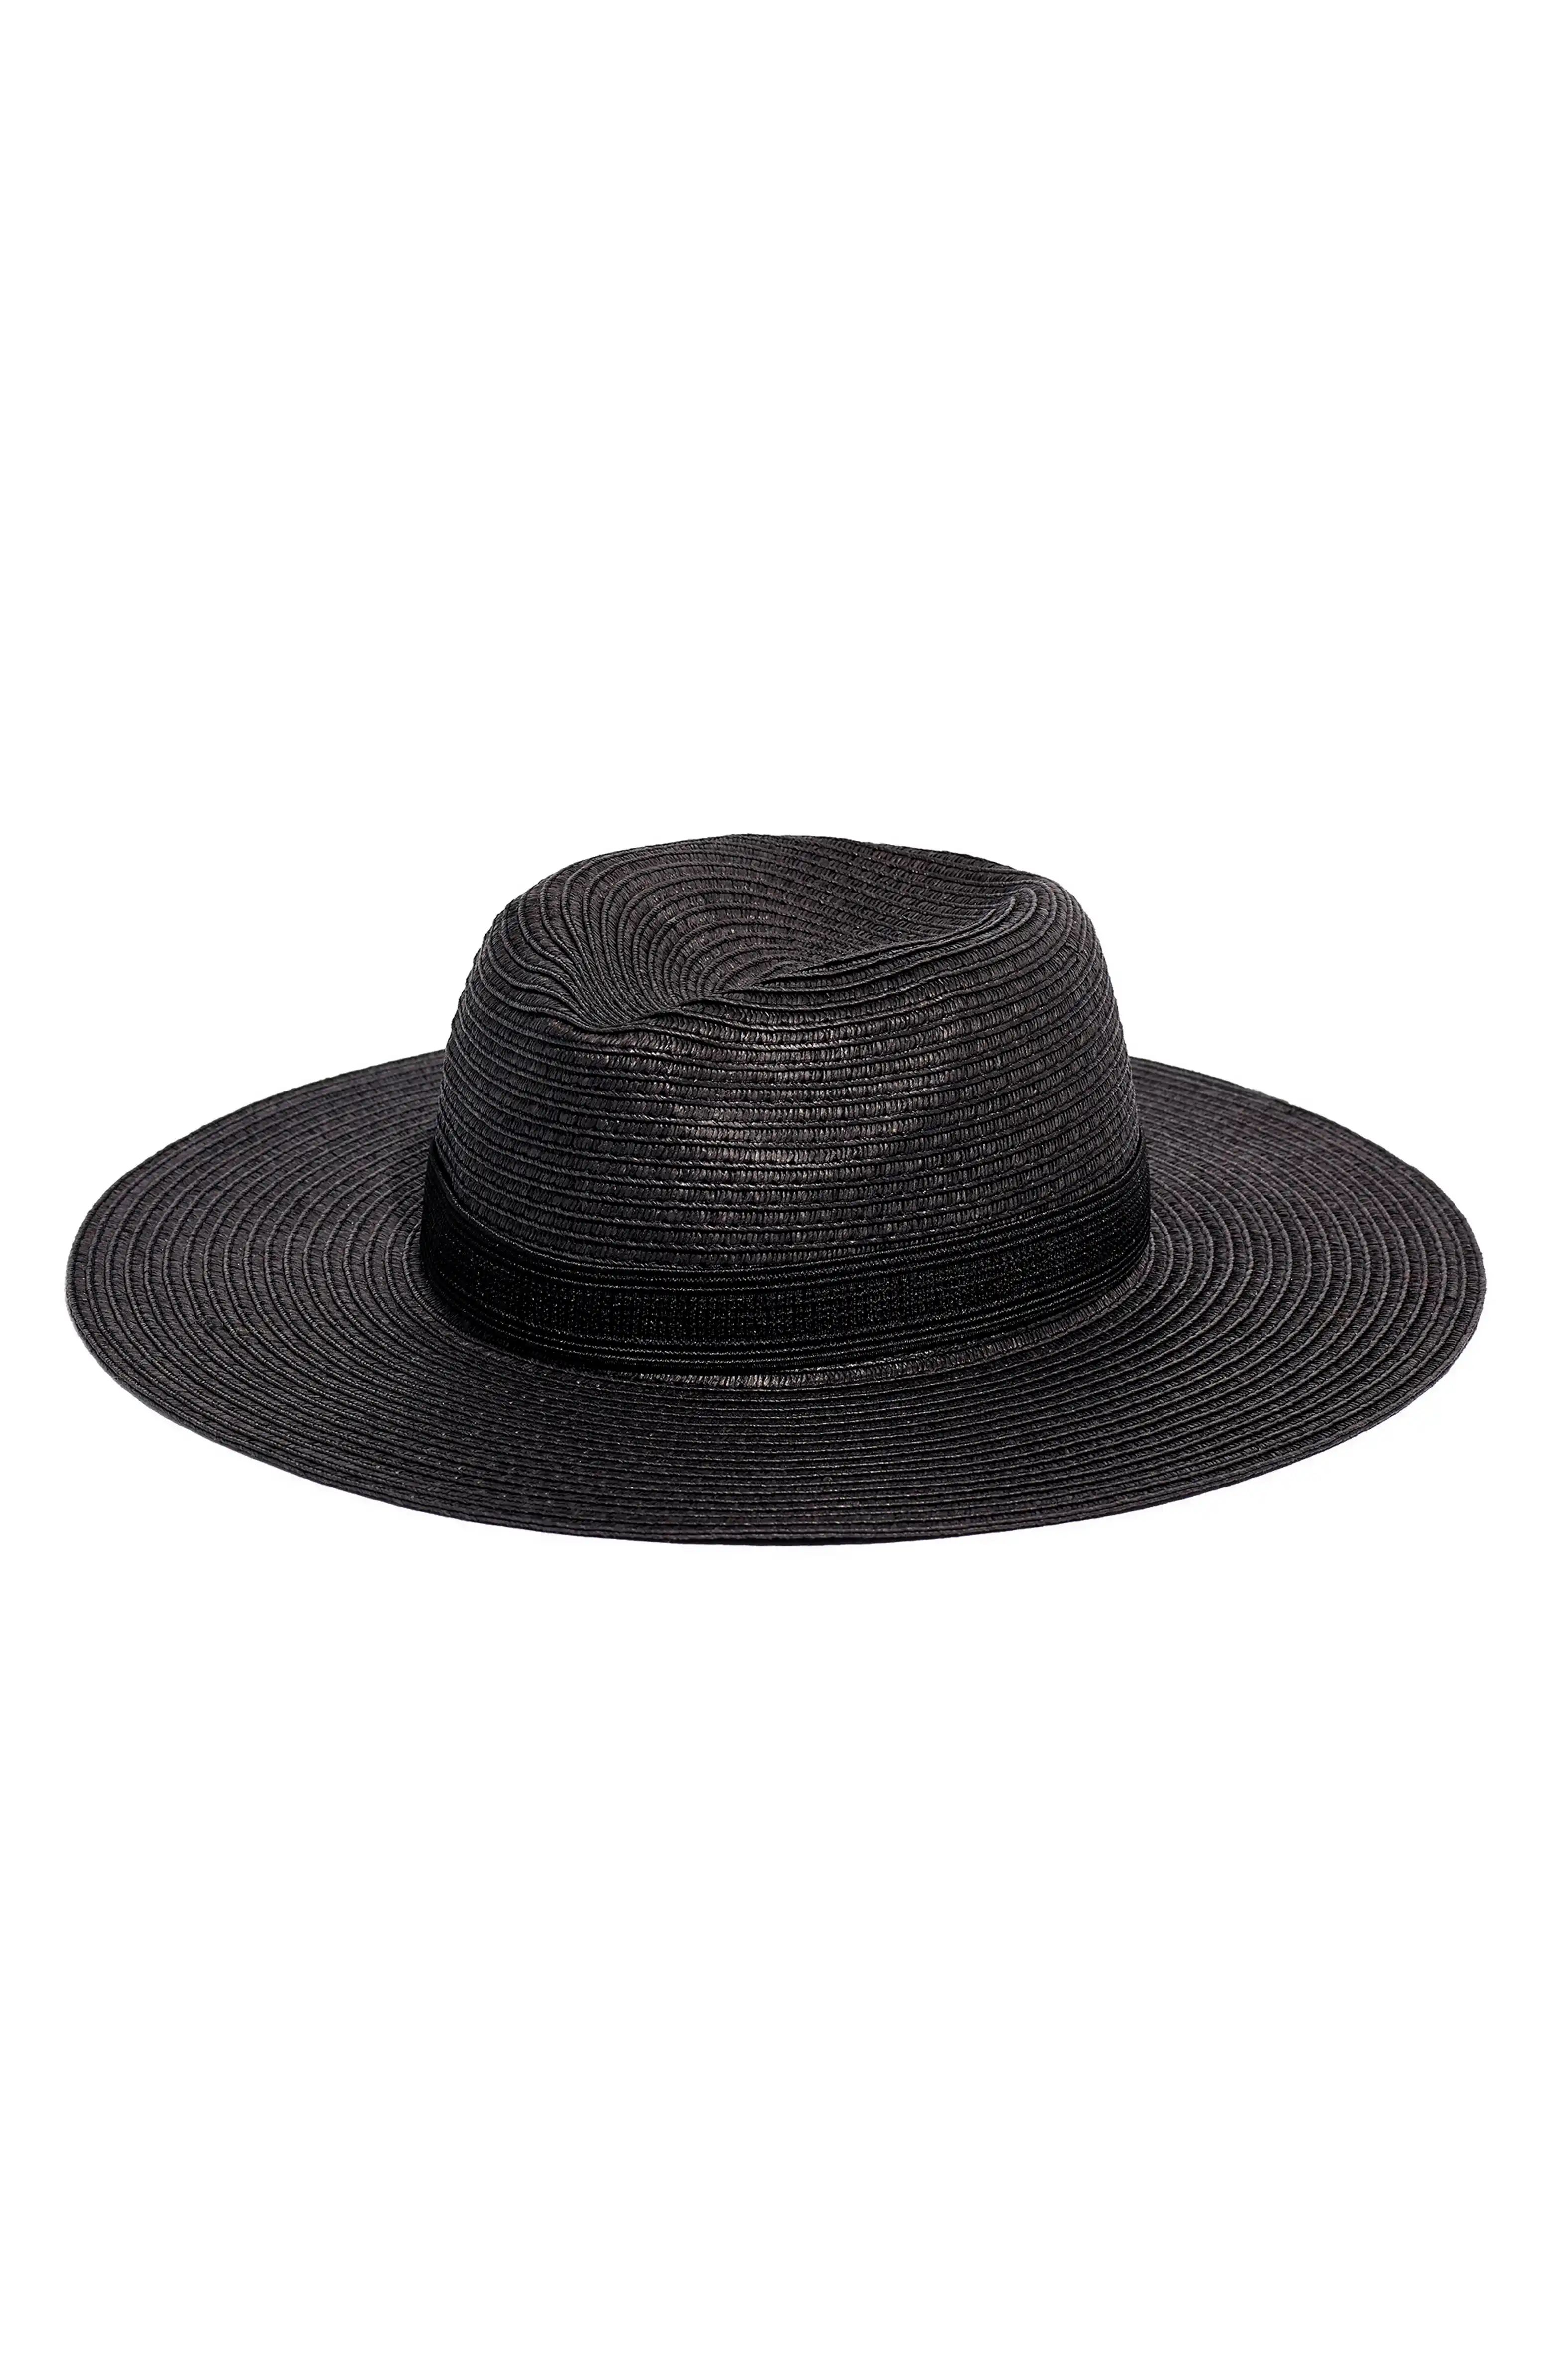 Mesa Packable Straw HatMADEWELLPrice$29.50Free ShippingHandwoven, flexible and packable straw len... | Nordstrom